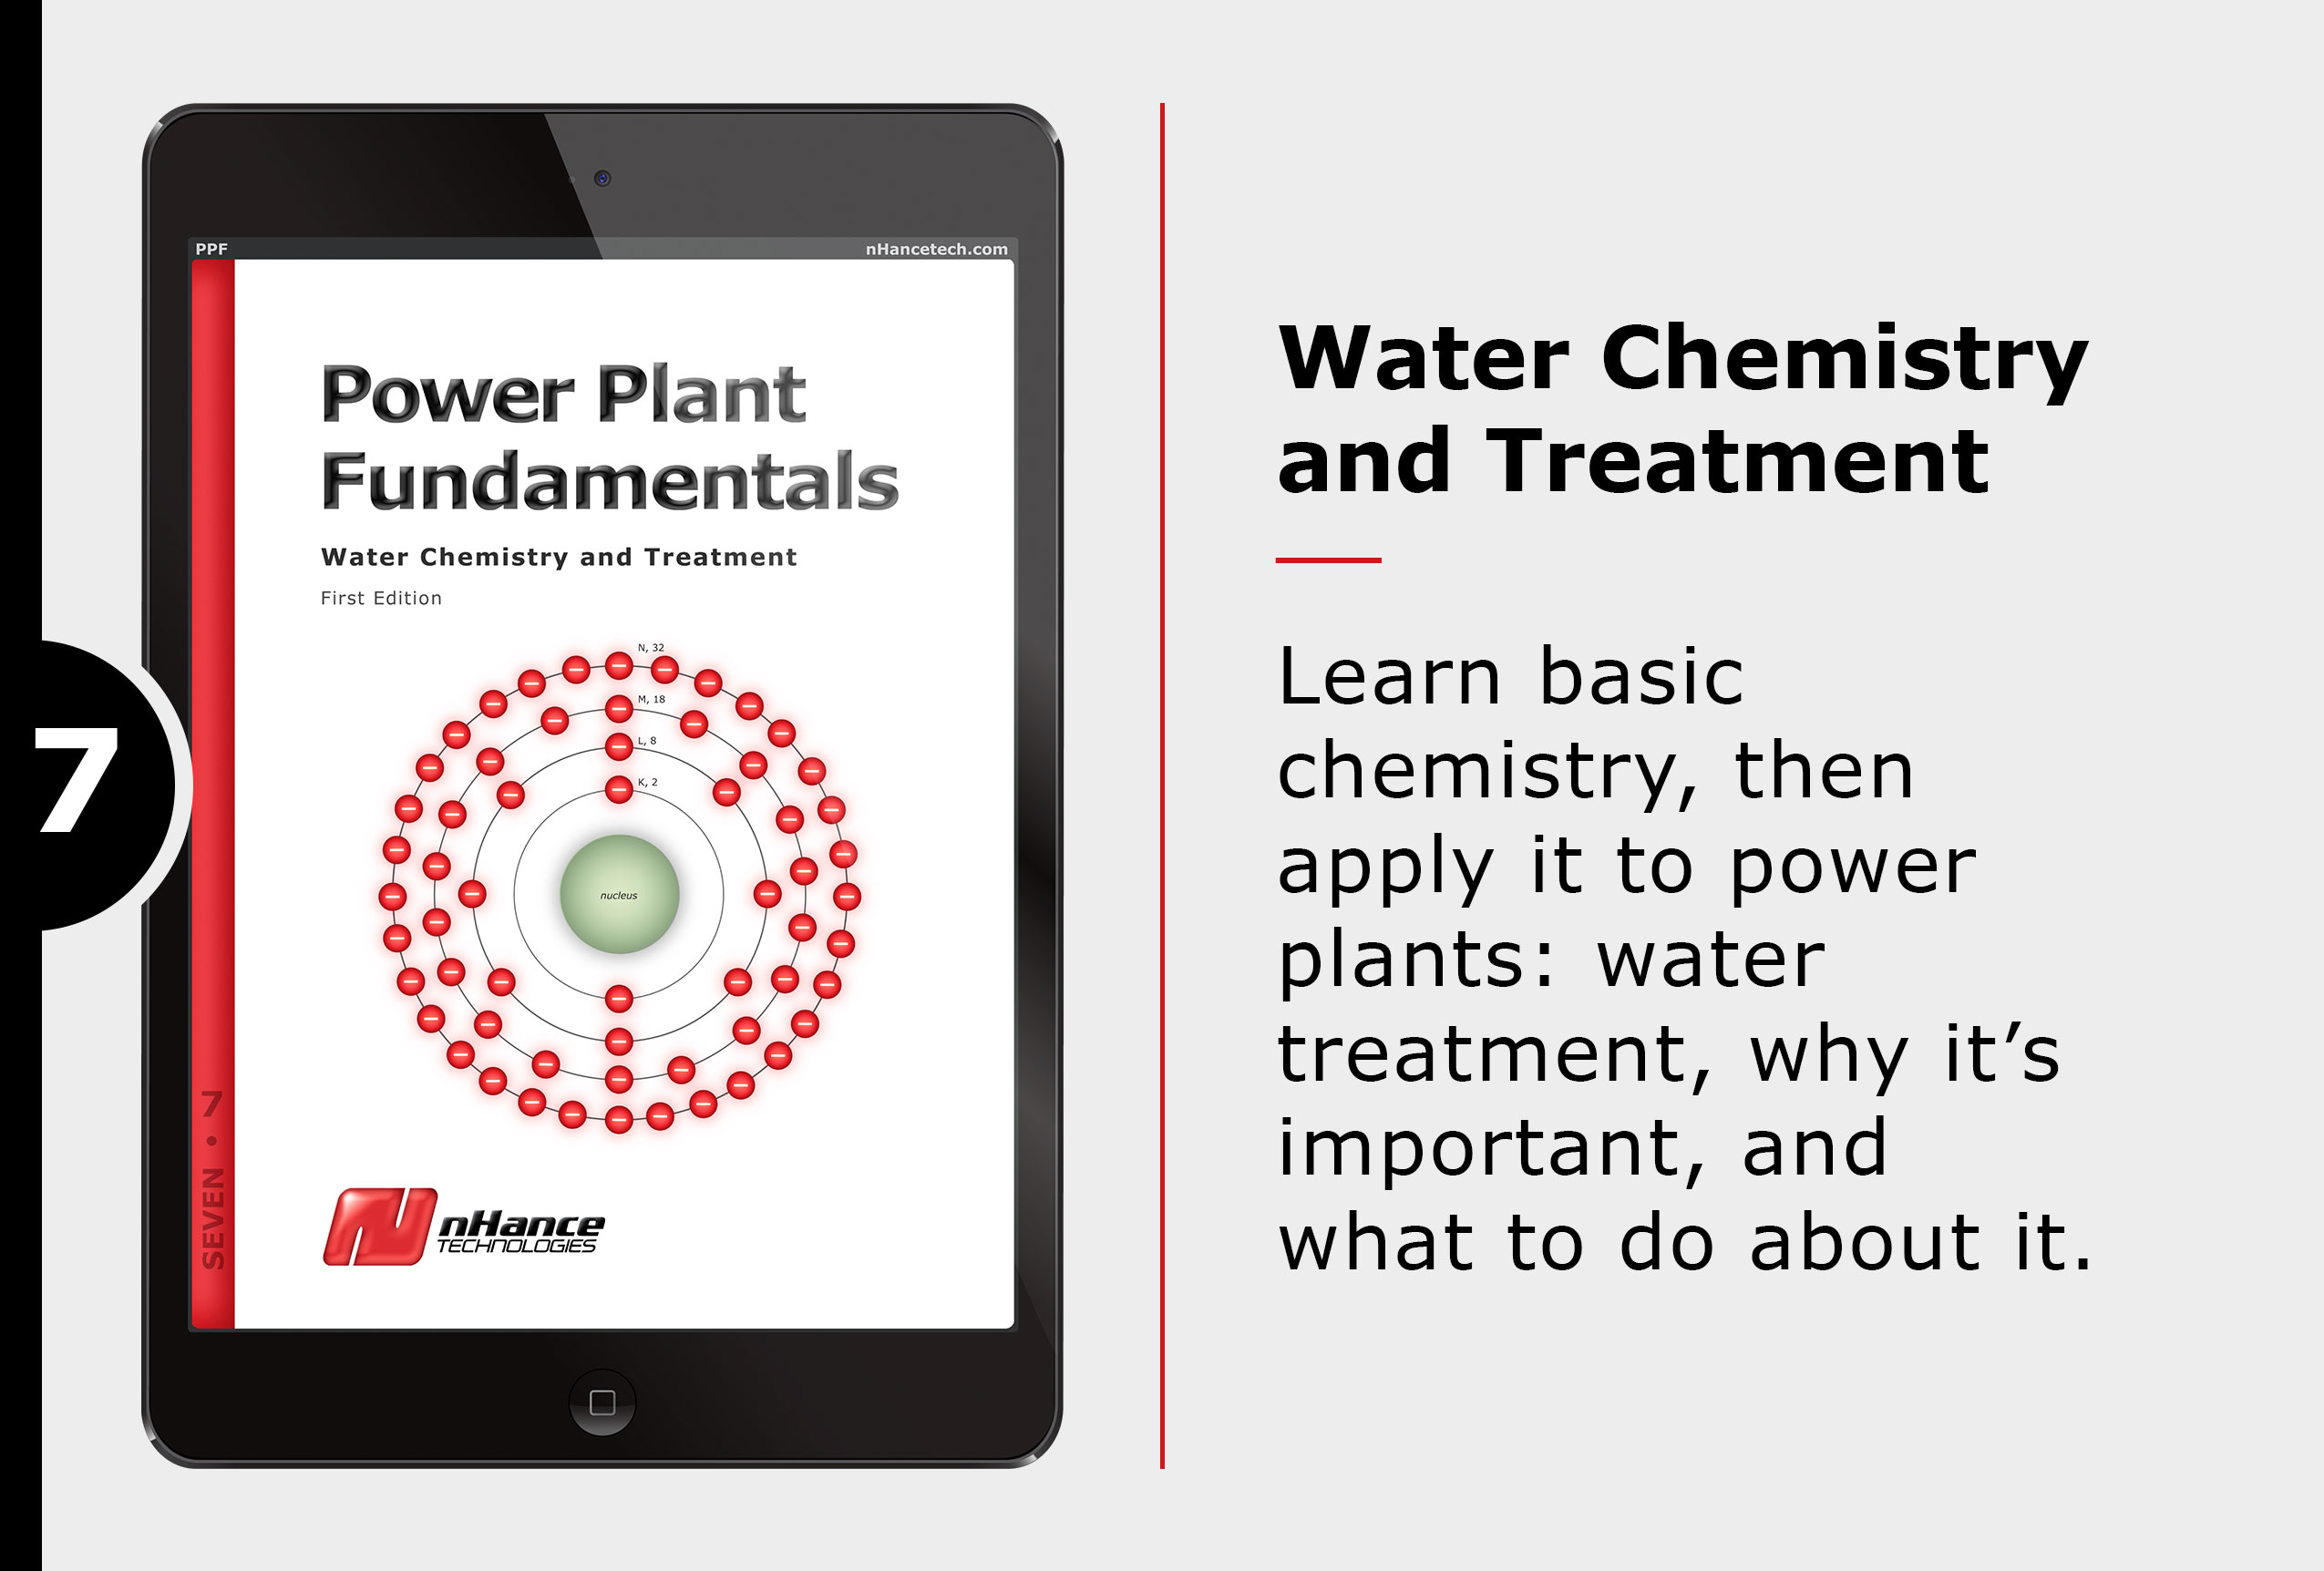 Water Chemistry and Treatment — Learn basic chemistry, then apply it to power plants: water treatment, why it's important, and what to do about it in this ebook from the Power Plant Fundamentals series.